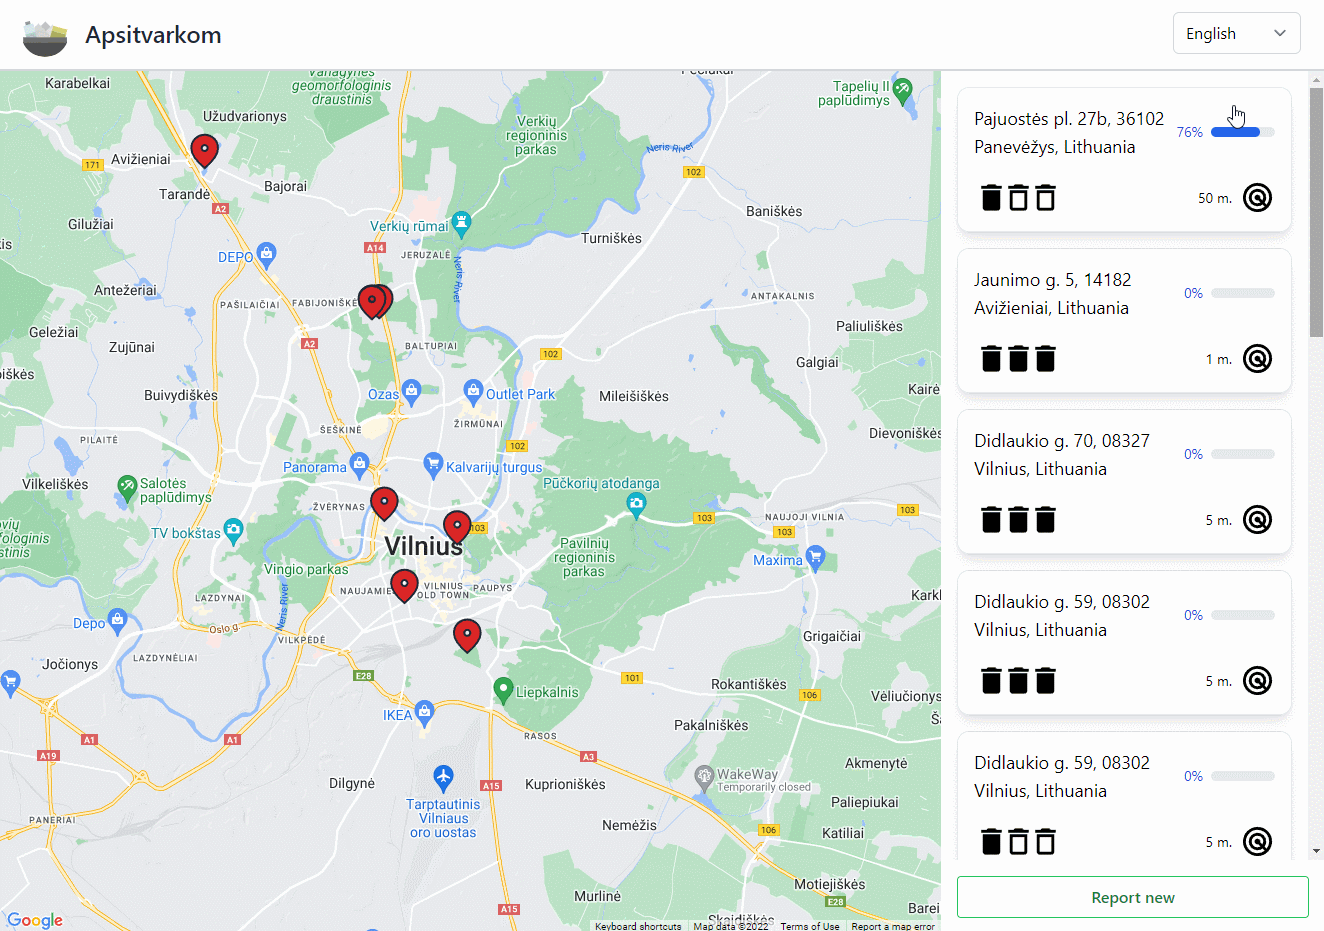 Reporting a new polluted location on Apsitvarkom